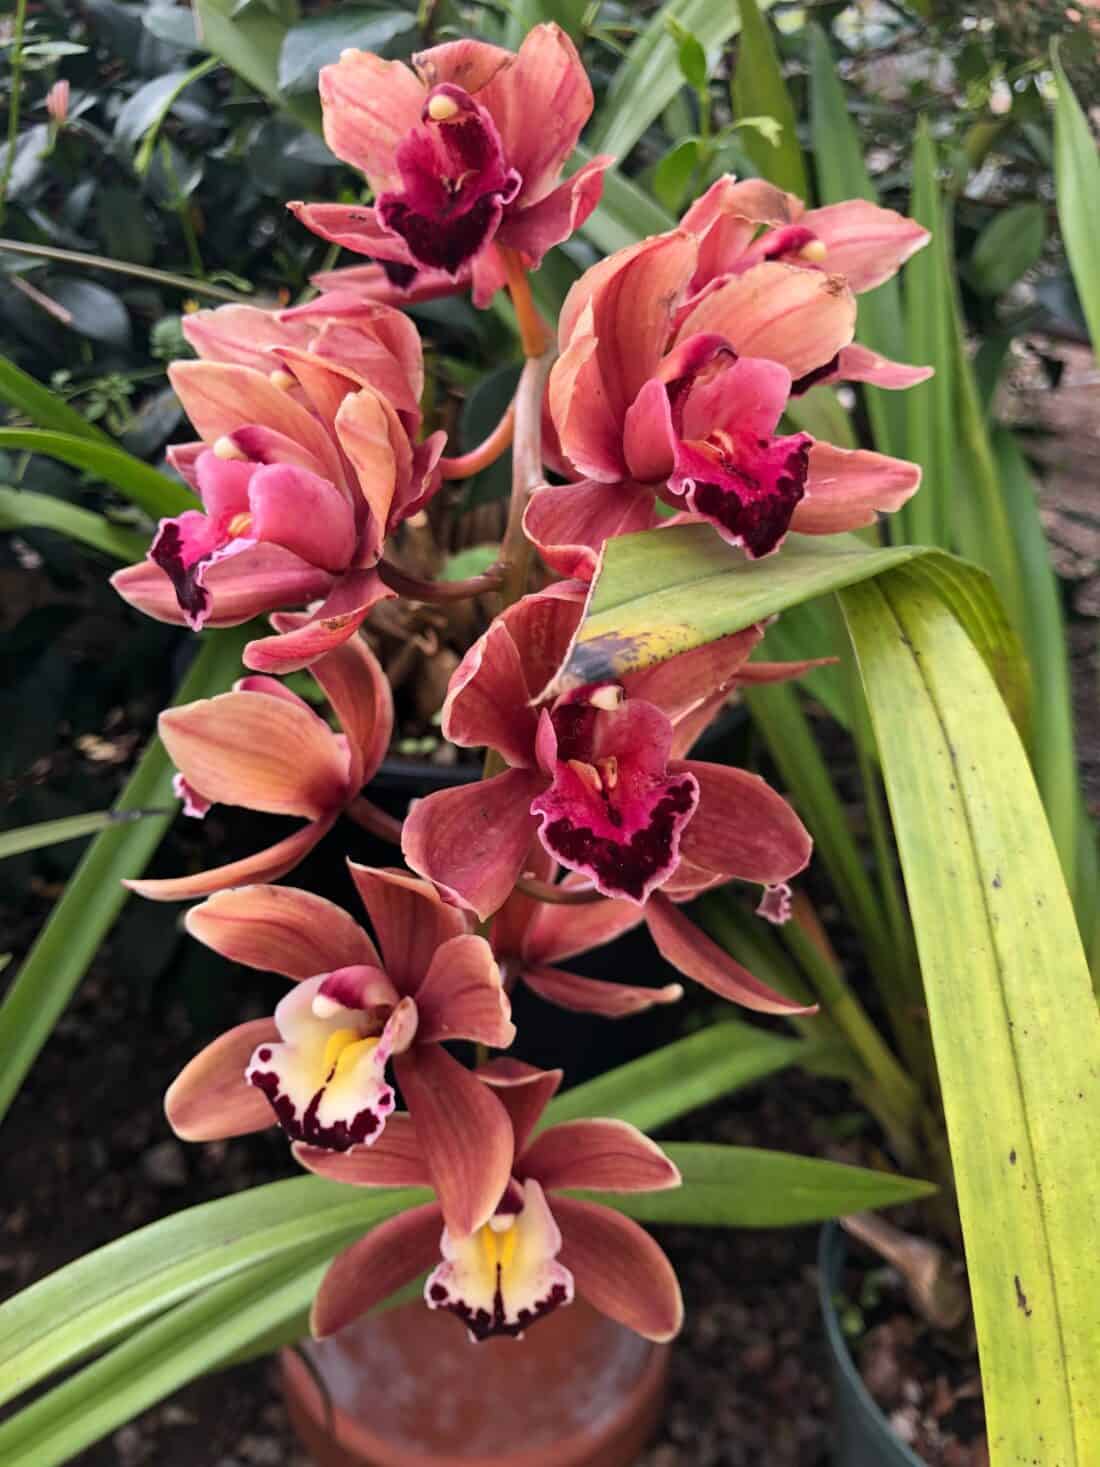 A cluster of blooming orchids displaying shades of pink, peach, and burgundy with yellow centers are surrounded by long, slender green leaves. The flowers are set against a backdrop of other leafy plants in the Boston Garden Center.